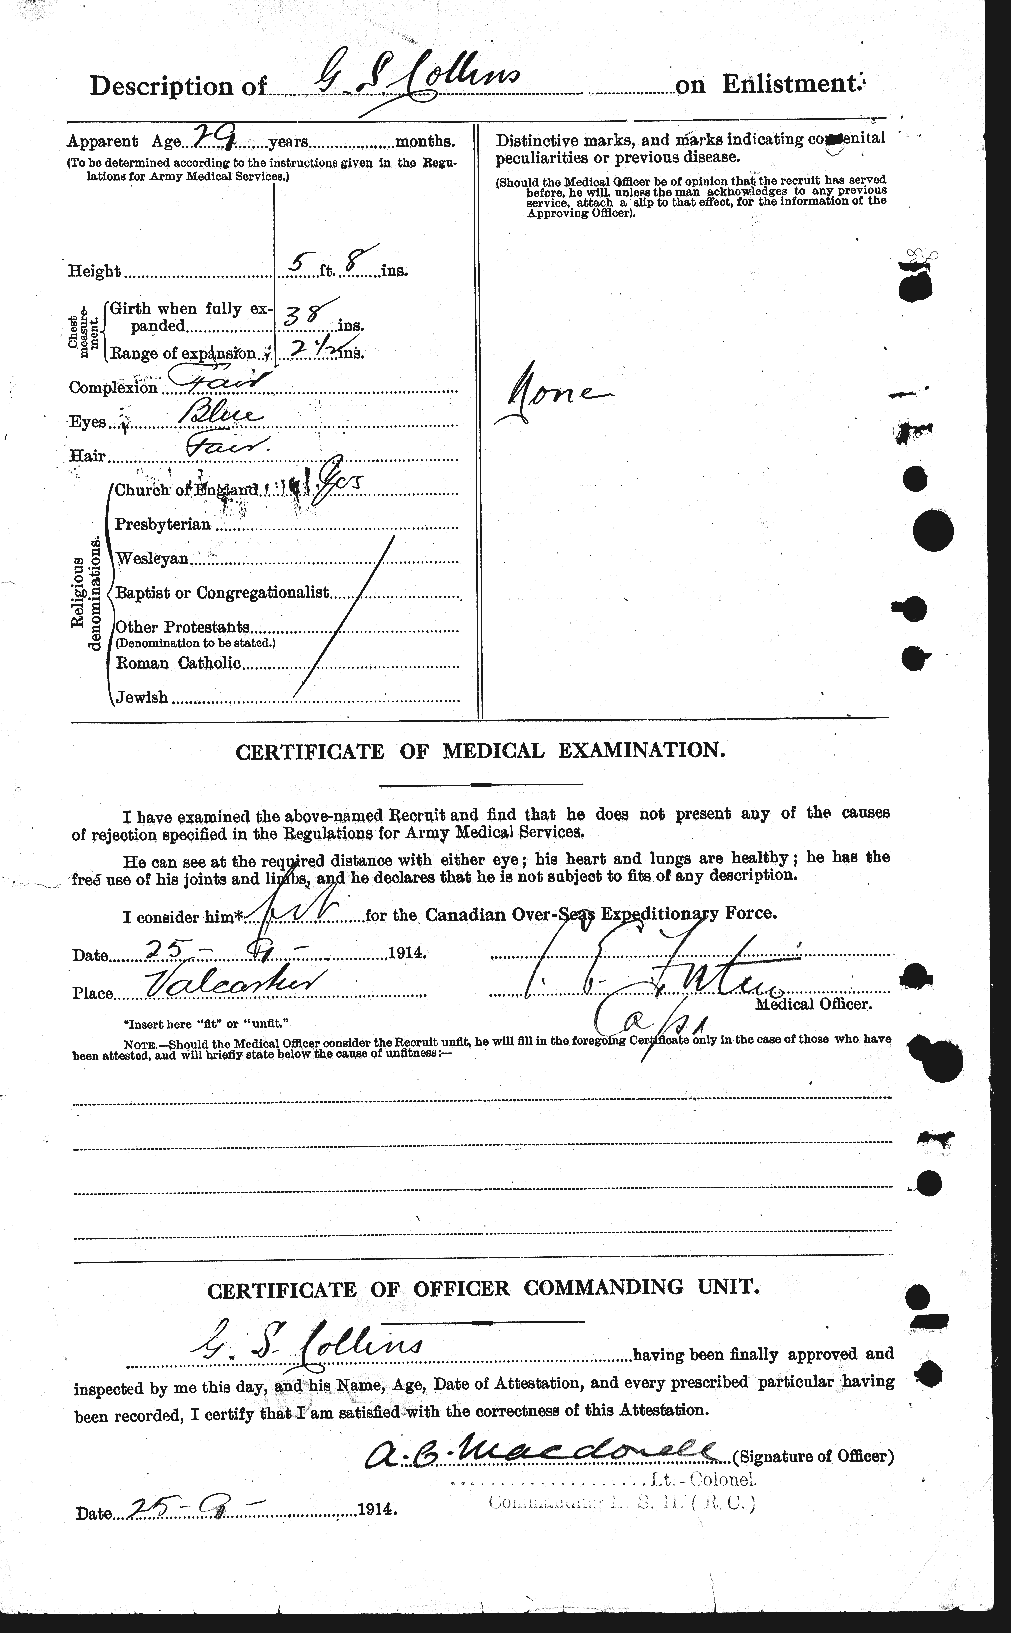 Personnel Records of the First World War - CEF 070524b